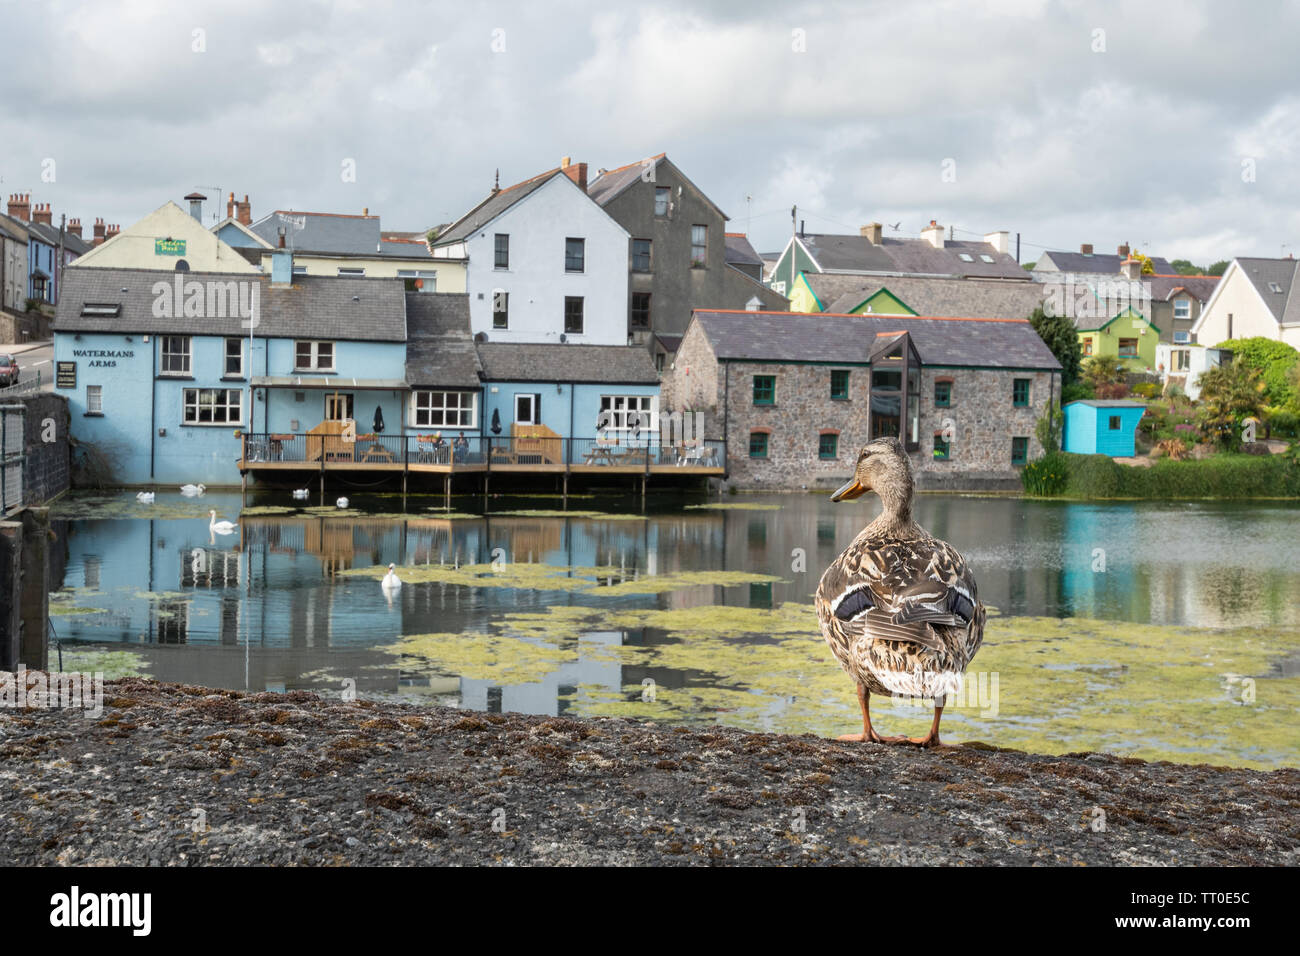 Mallard duck on a wall overlooking the millpond and Watermans Arms pub or public house in Pembroke town centre, Pembrokeshire, Wales, UK Stock Photo